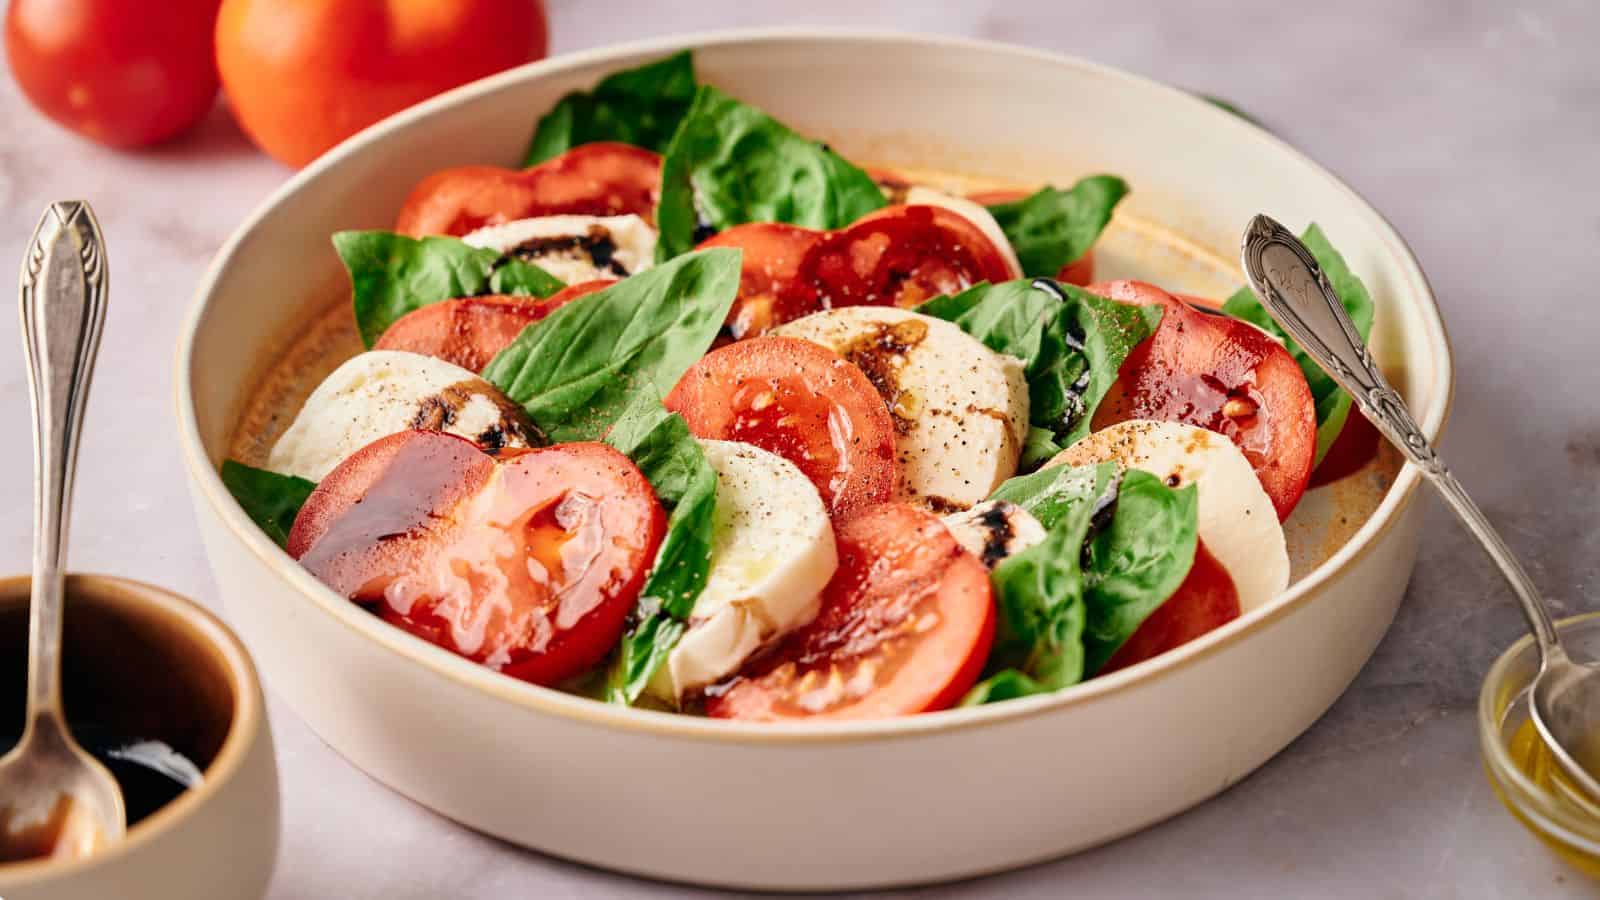 A bowl contains a Caprese salad made of fresh tomato slices, mozzarella, and basil leaves, drizzled with balsamic reduction and olive oil. Two tomatoes and a small bowl are in the background.